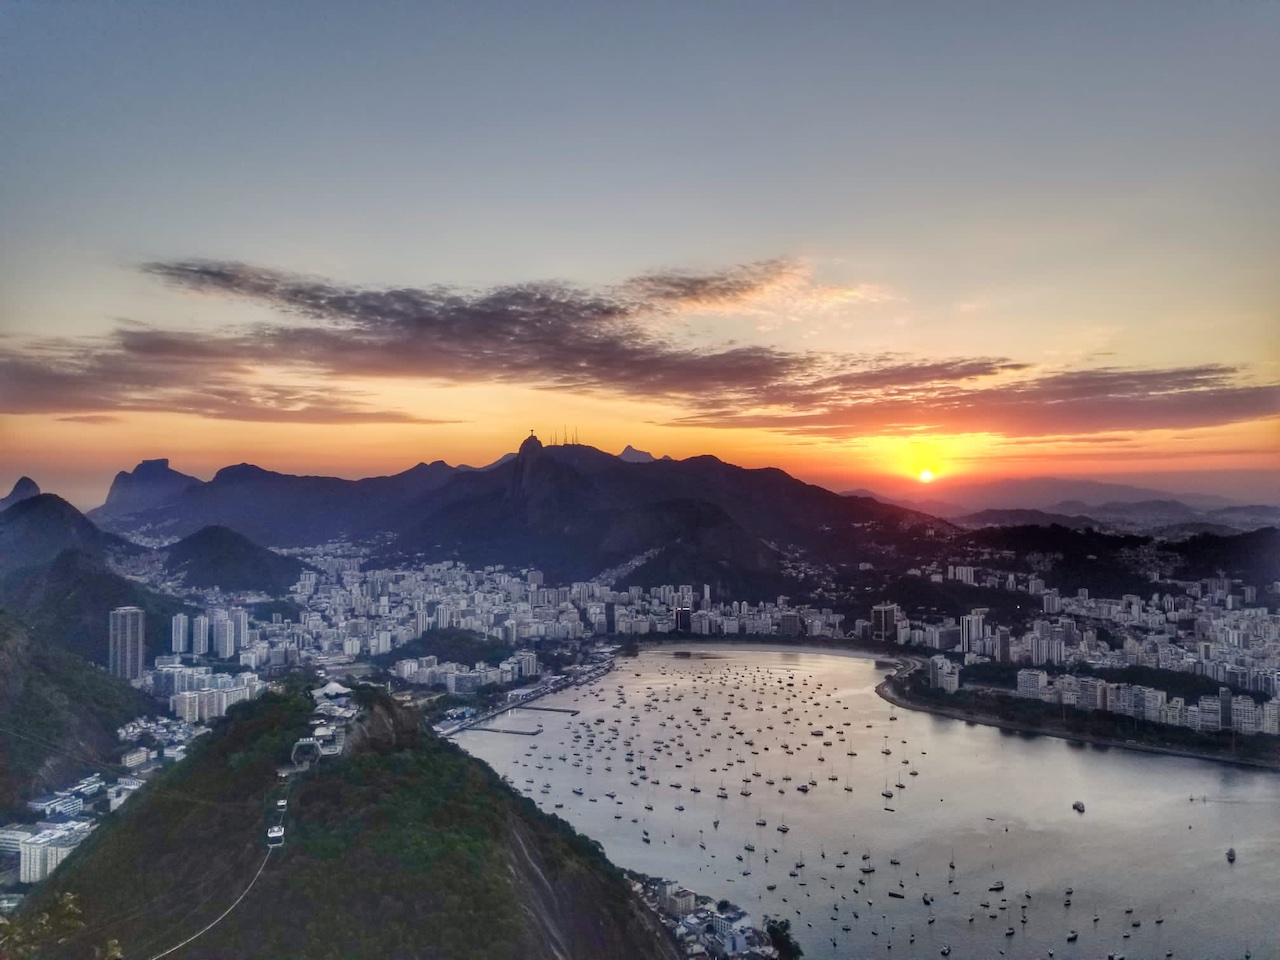 Guanabara Bay in Rio de Janeiro, Brazil. Rio de Janeiro is one of the communities that has expressed interest in working with PEERS and NASA on their inundation mapping project. Image credit: NASA/Augusto Getirana
